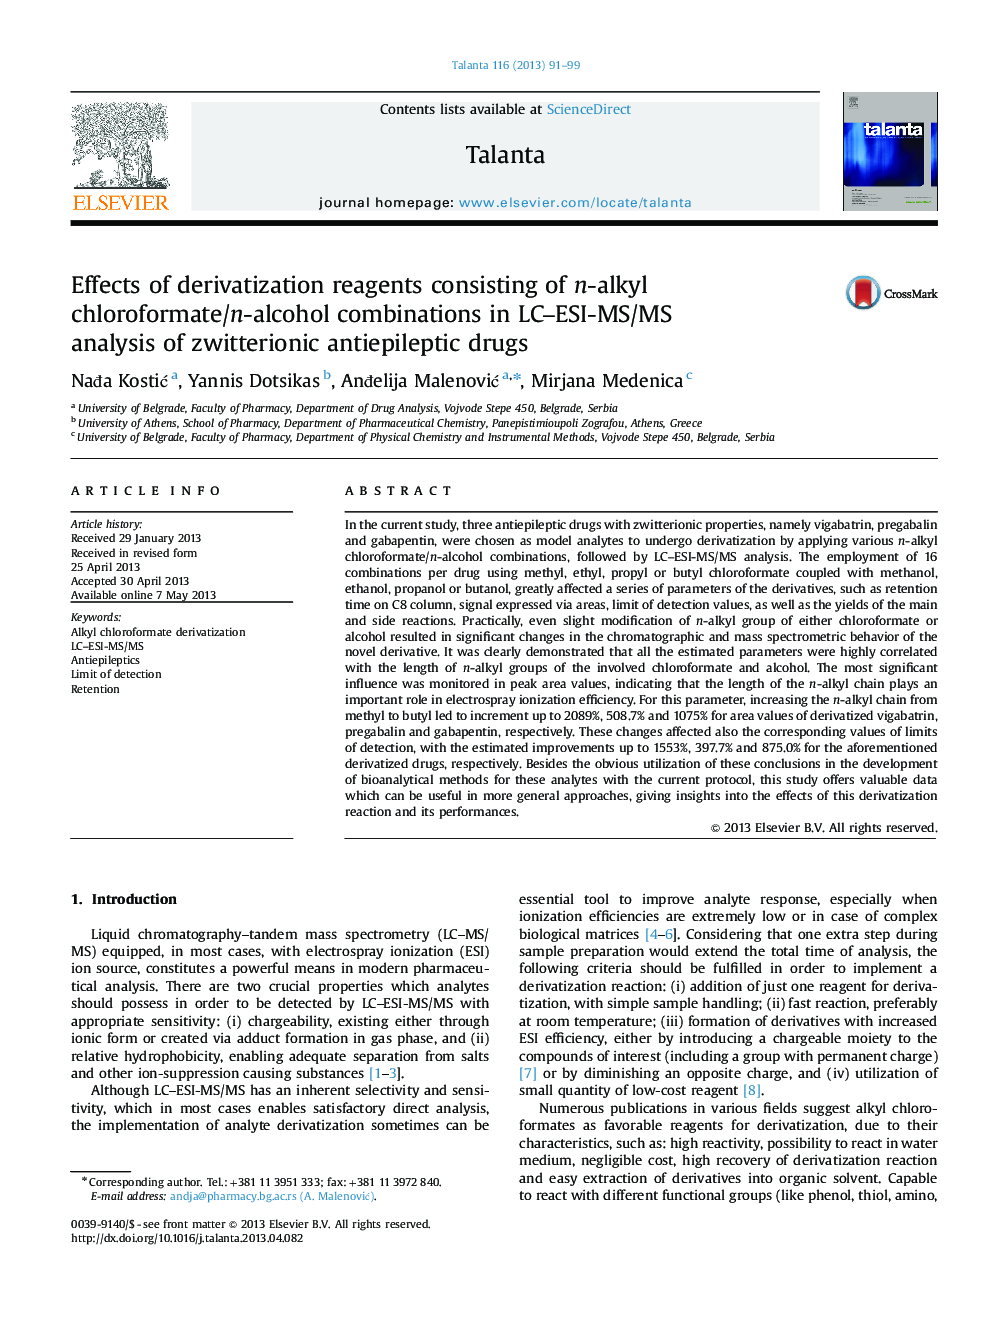 Effects of derivatization reagents consisting of n-alkyl chloroformate/n-alcohol combinations in LC-ESI-MS/MS analysis of zwitterionic antiepileptic drugs